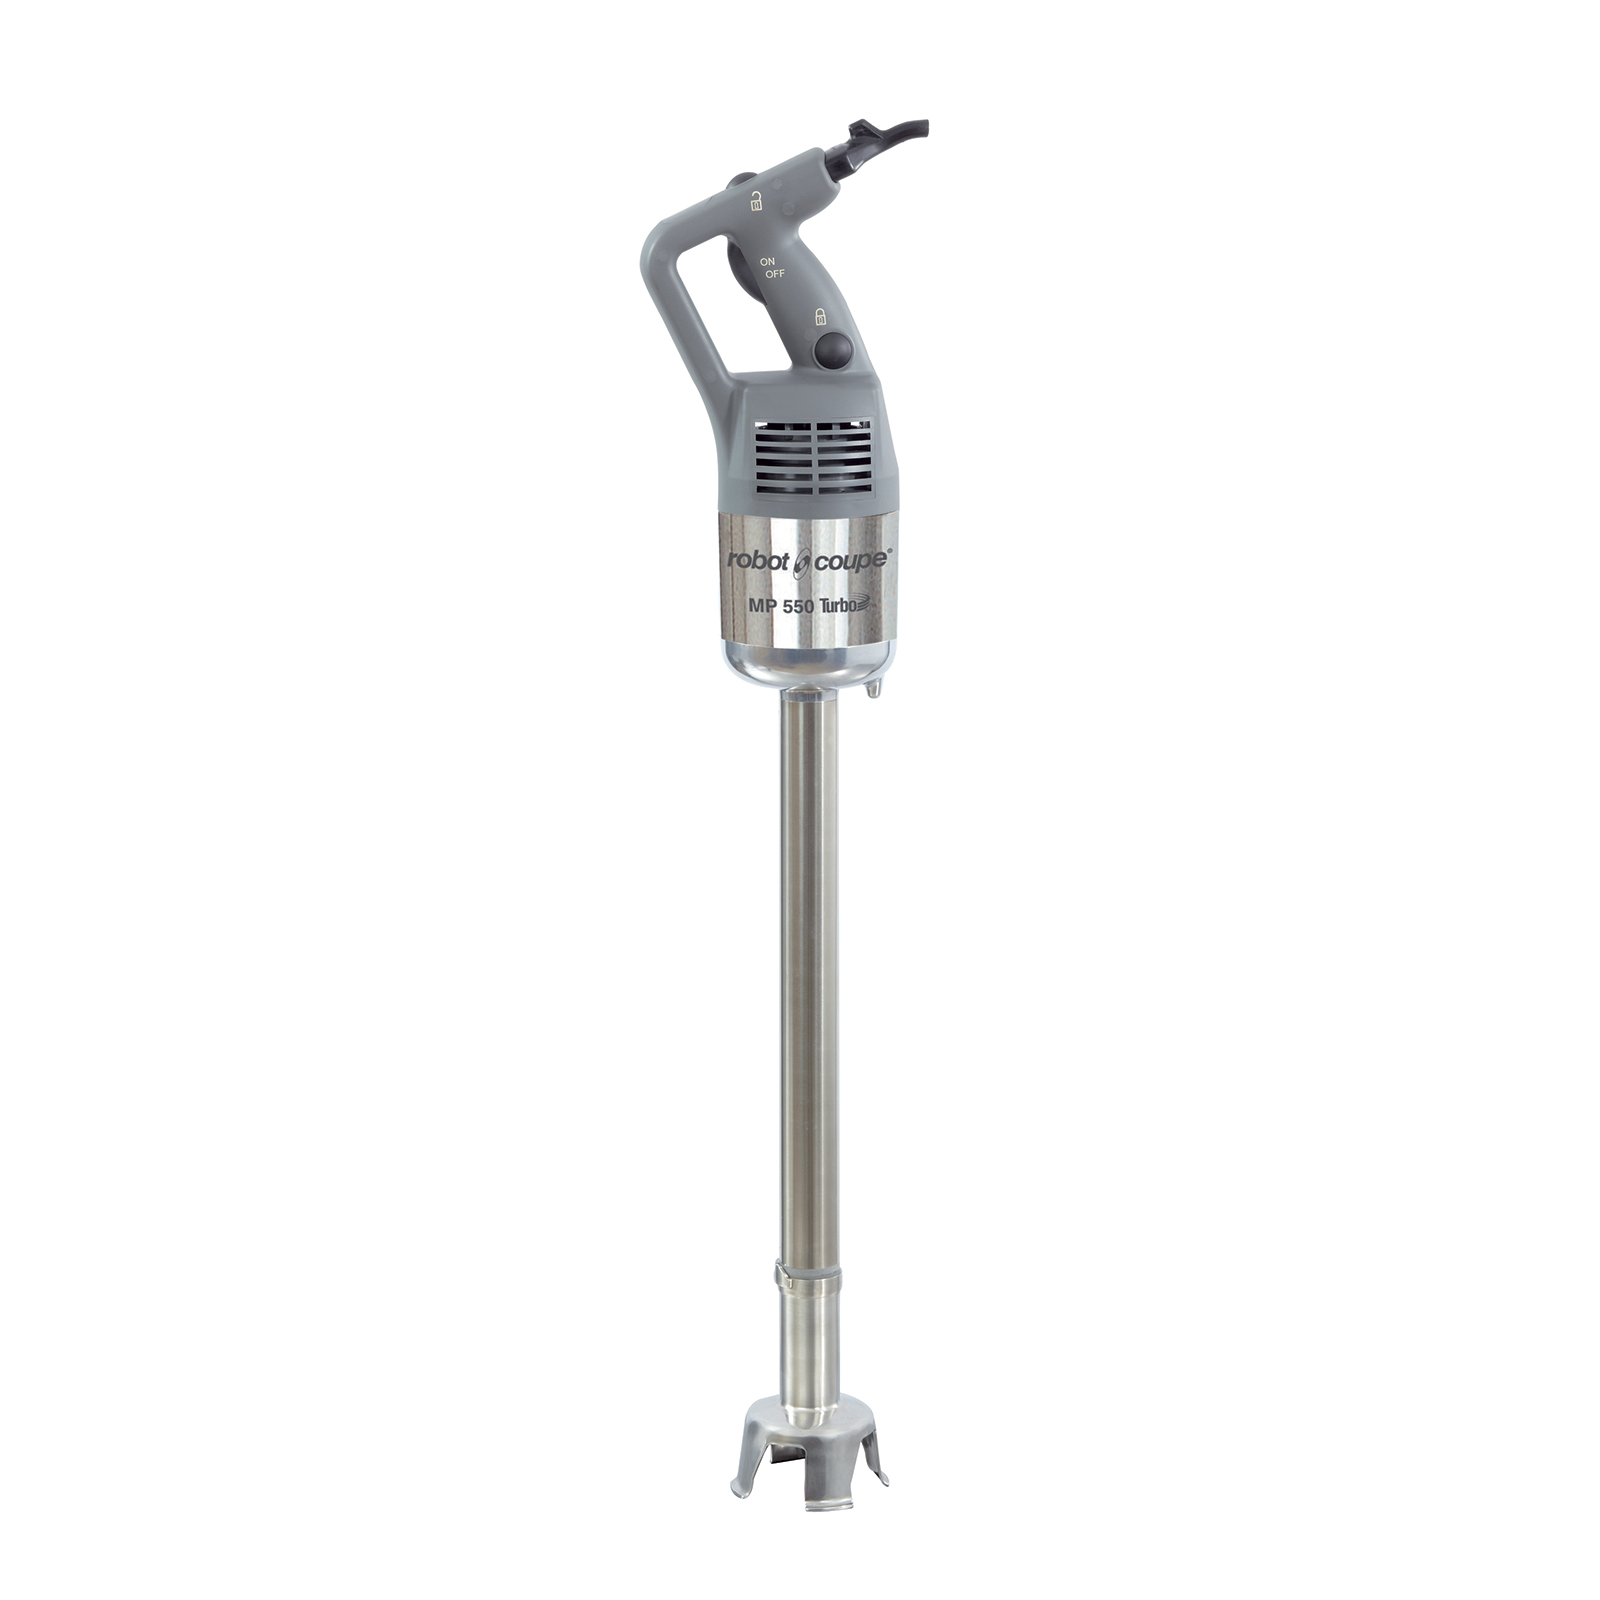 21&quot; Commercial Power Mixer, 
hand
held, s/s shaft,
removable s/s foot &amp; knife,
ergonomically shaped handle,
single speed 12,000 RPM,
120v/60/1-ph, 7 amps, 840
watt, 1.2 HP, PROMO 730 
1 year replacement warranty